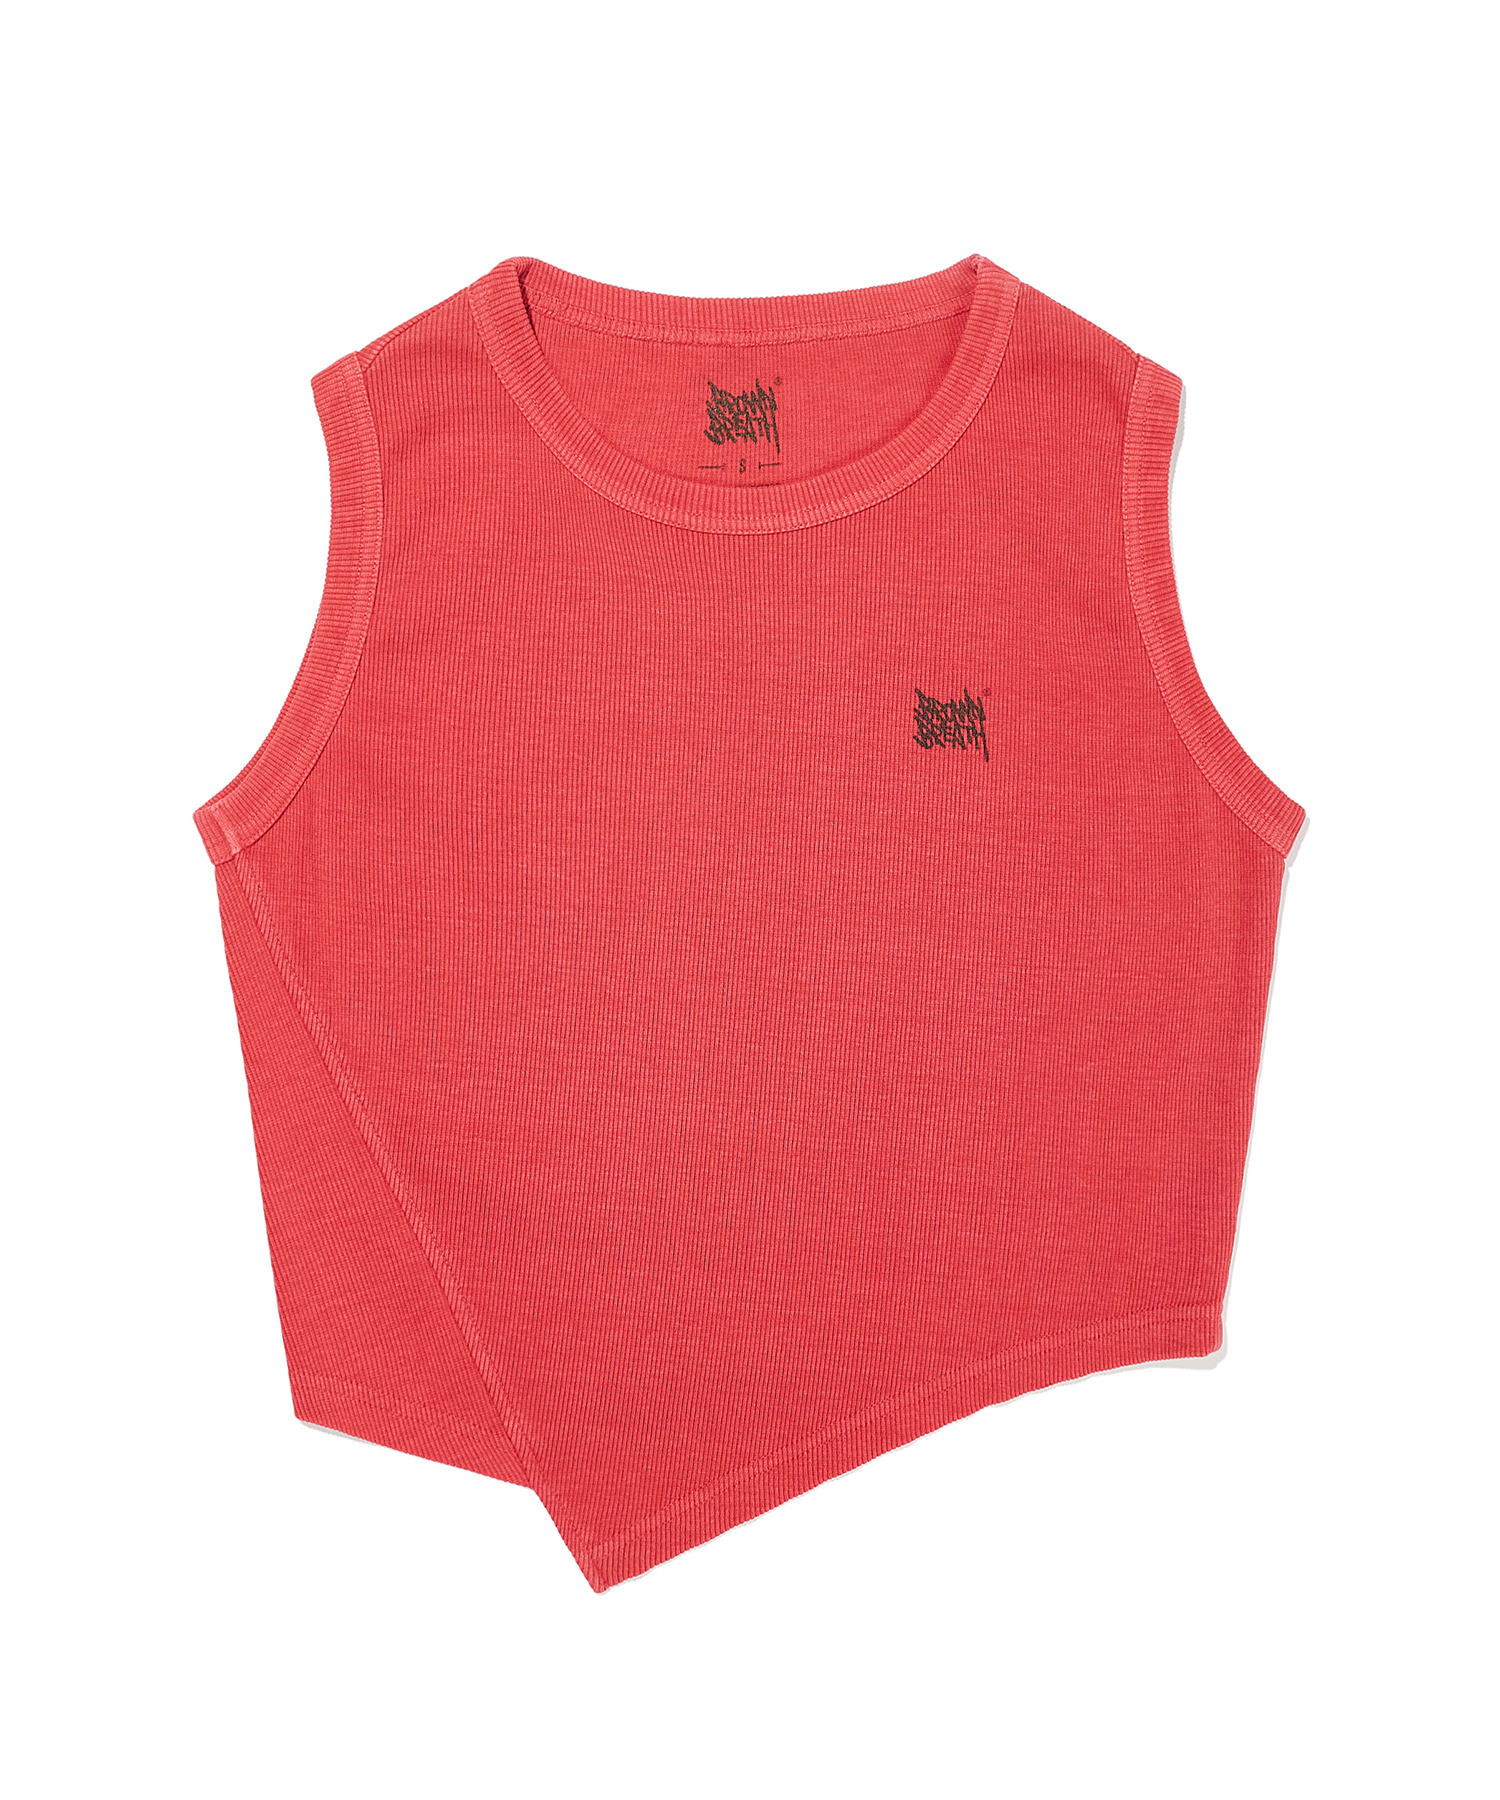 W TAG PIGMENT SLOPE TANK TOP - RED brownbreath